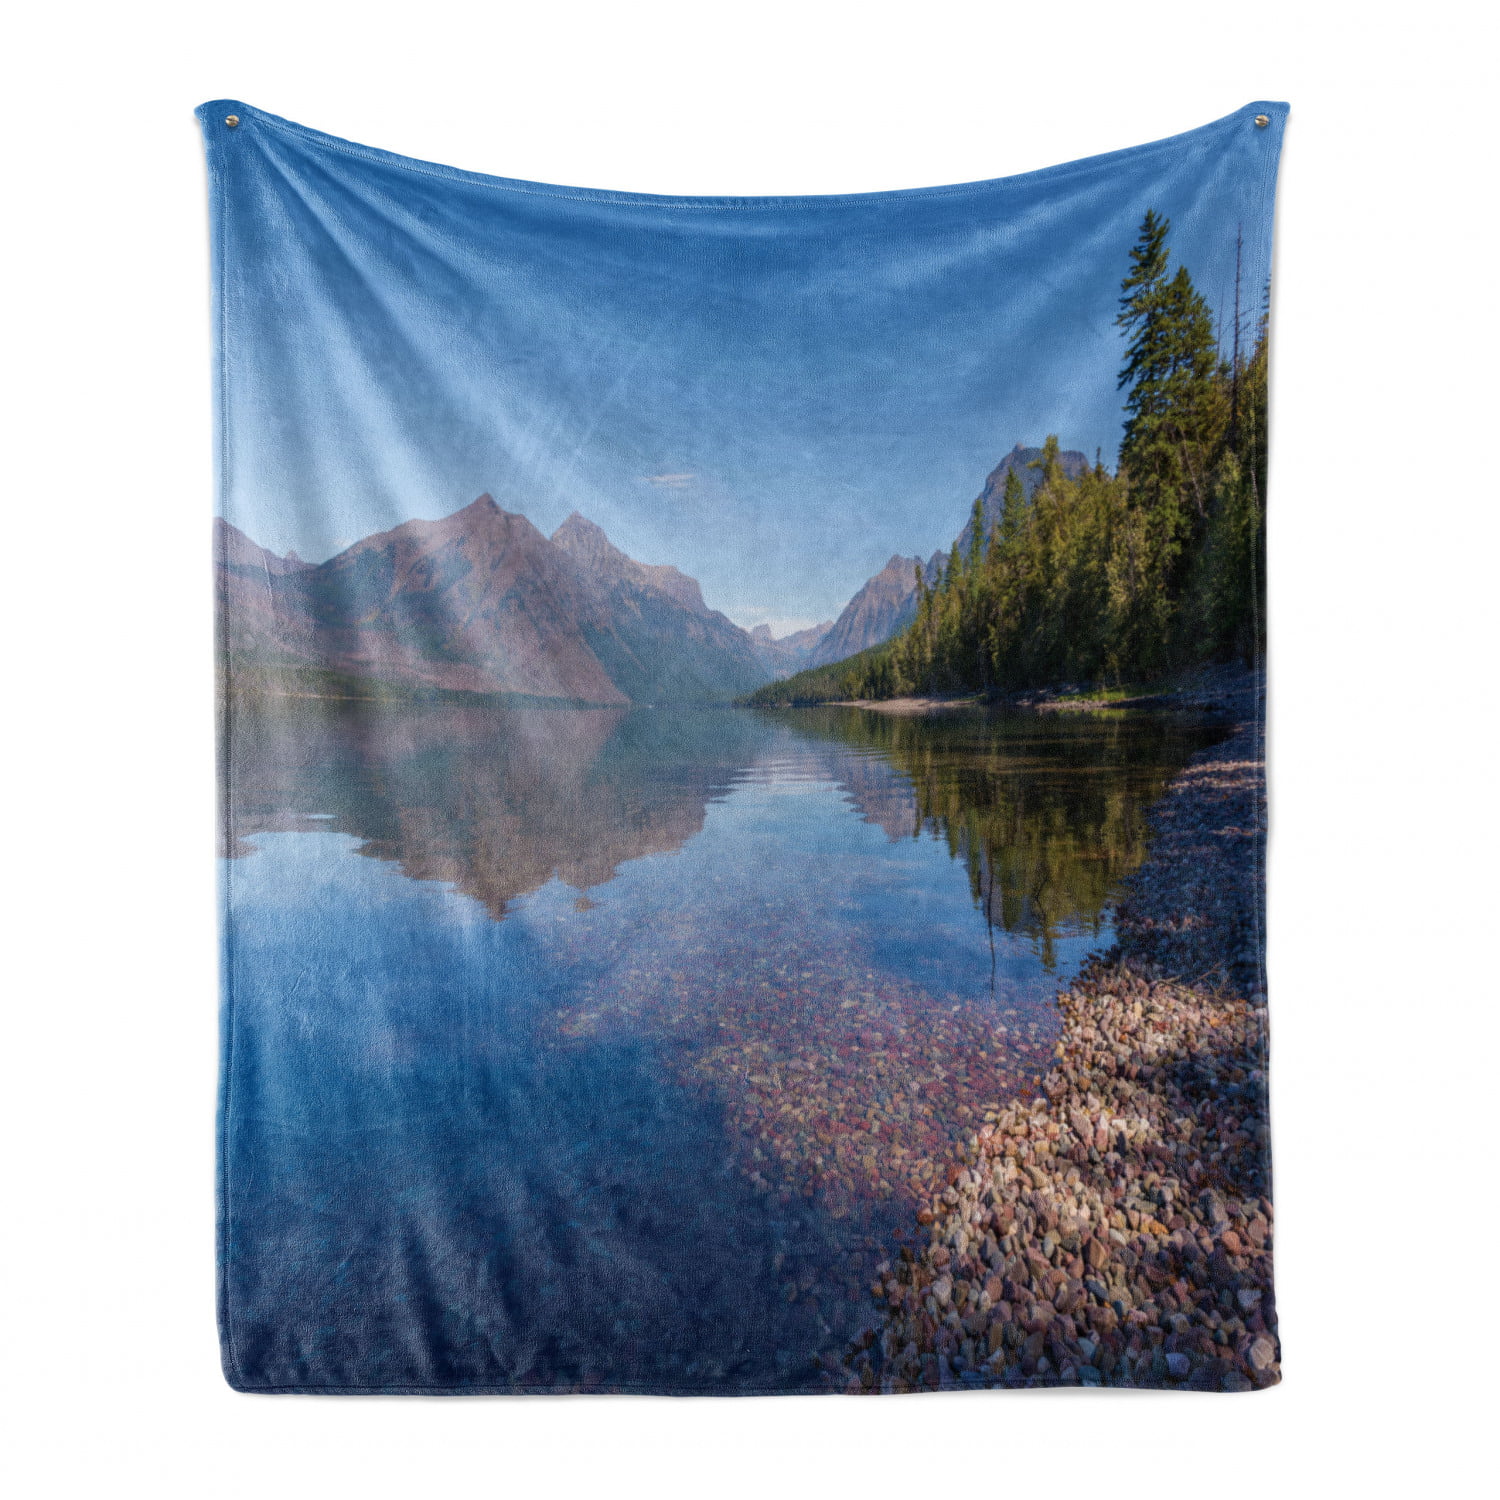 Cozy Plush for Indoor and Outdoor Use Ambesonne Glacier National Park Soft Flannel Fleece Throw Blanket Multicolor Outdoor Scene of a Forest Colorful Stones Near The Lake in Montana 50 x 70